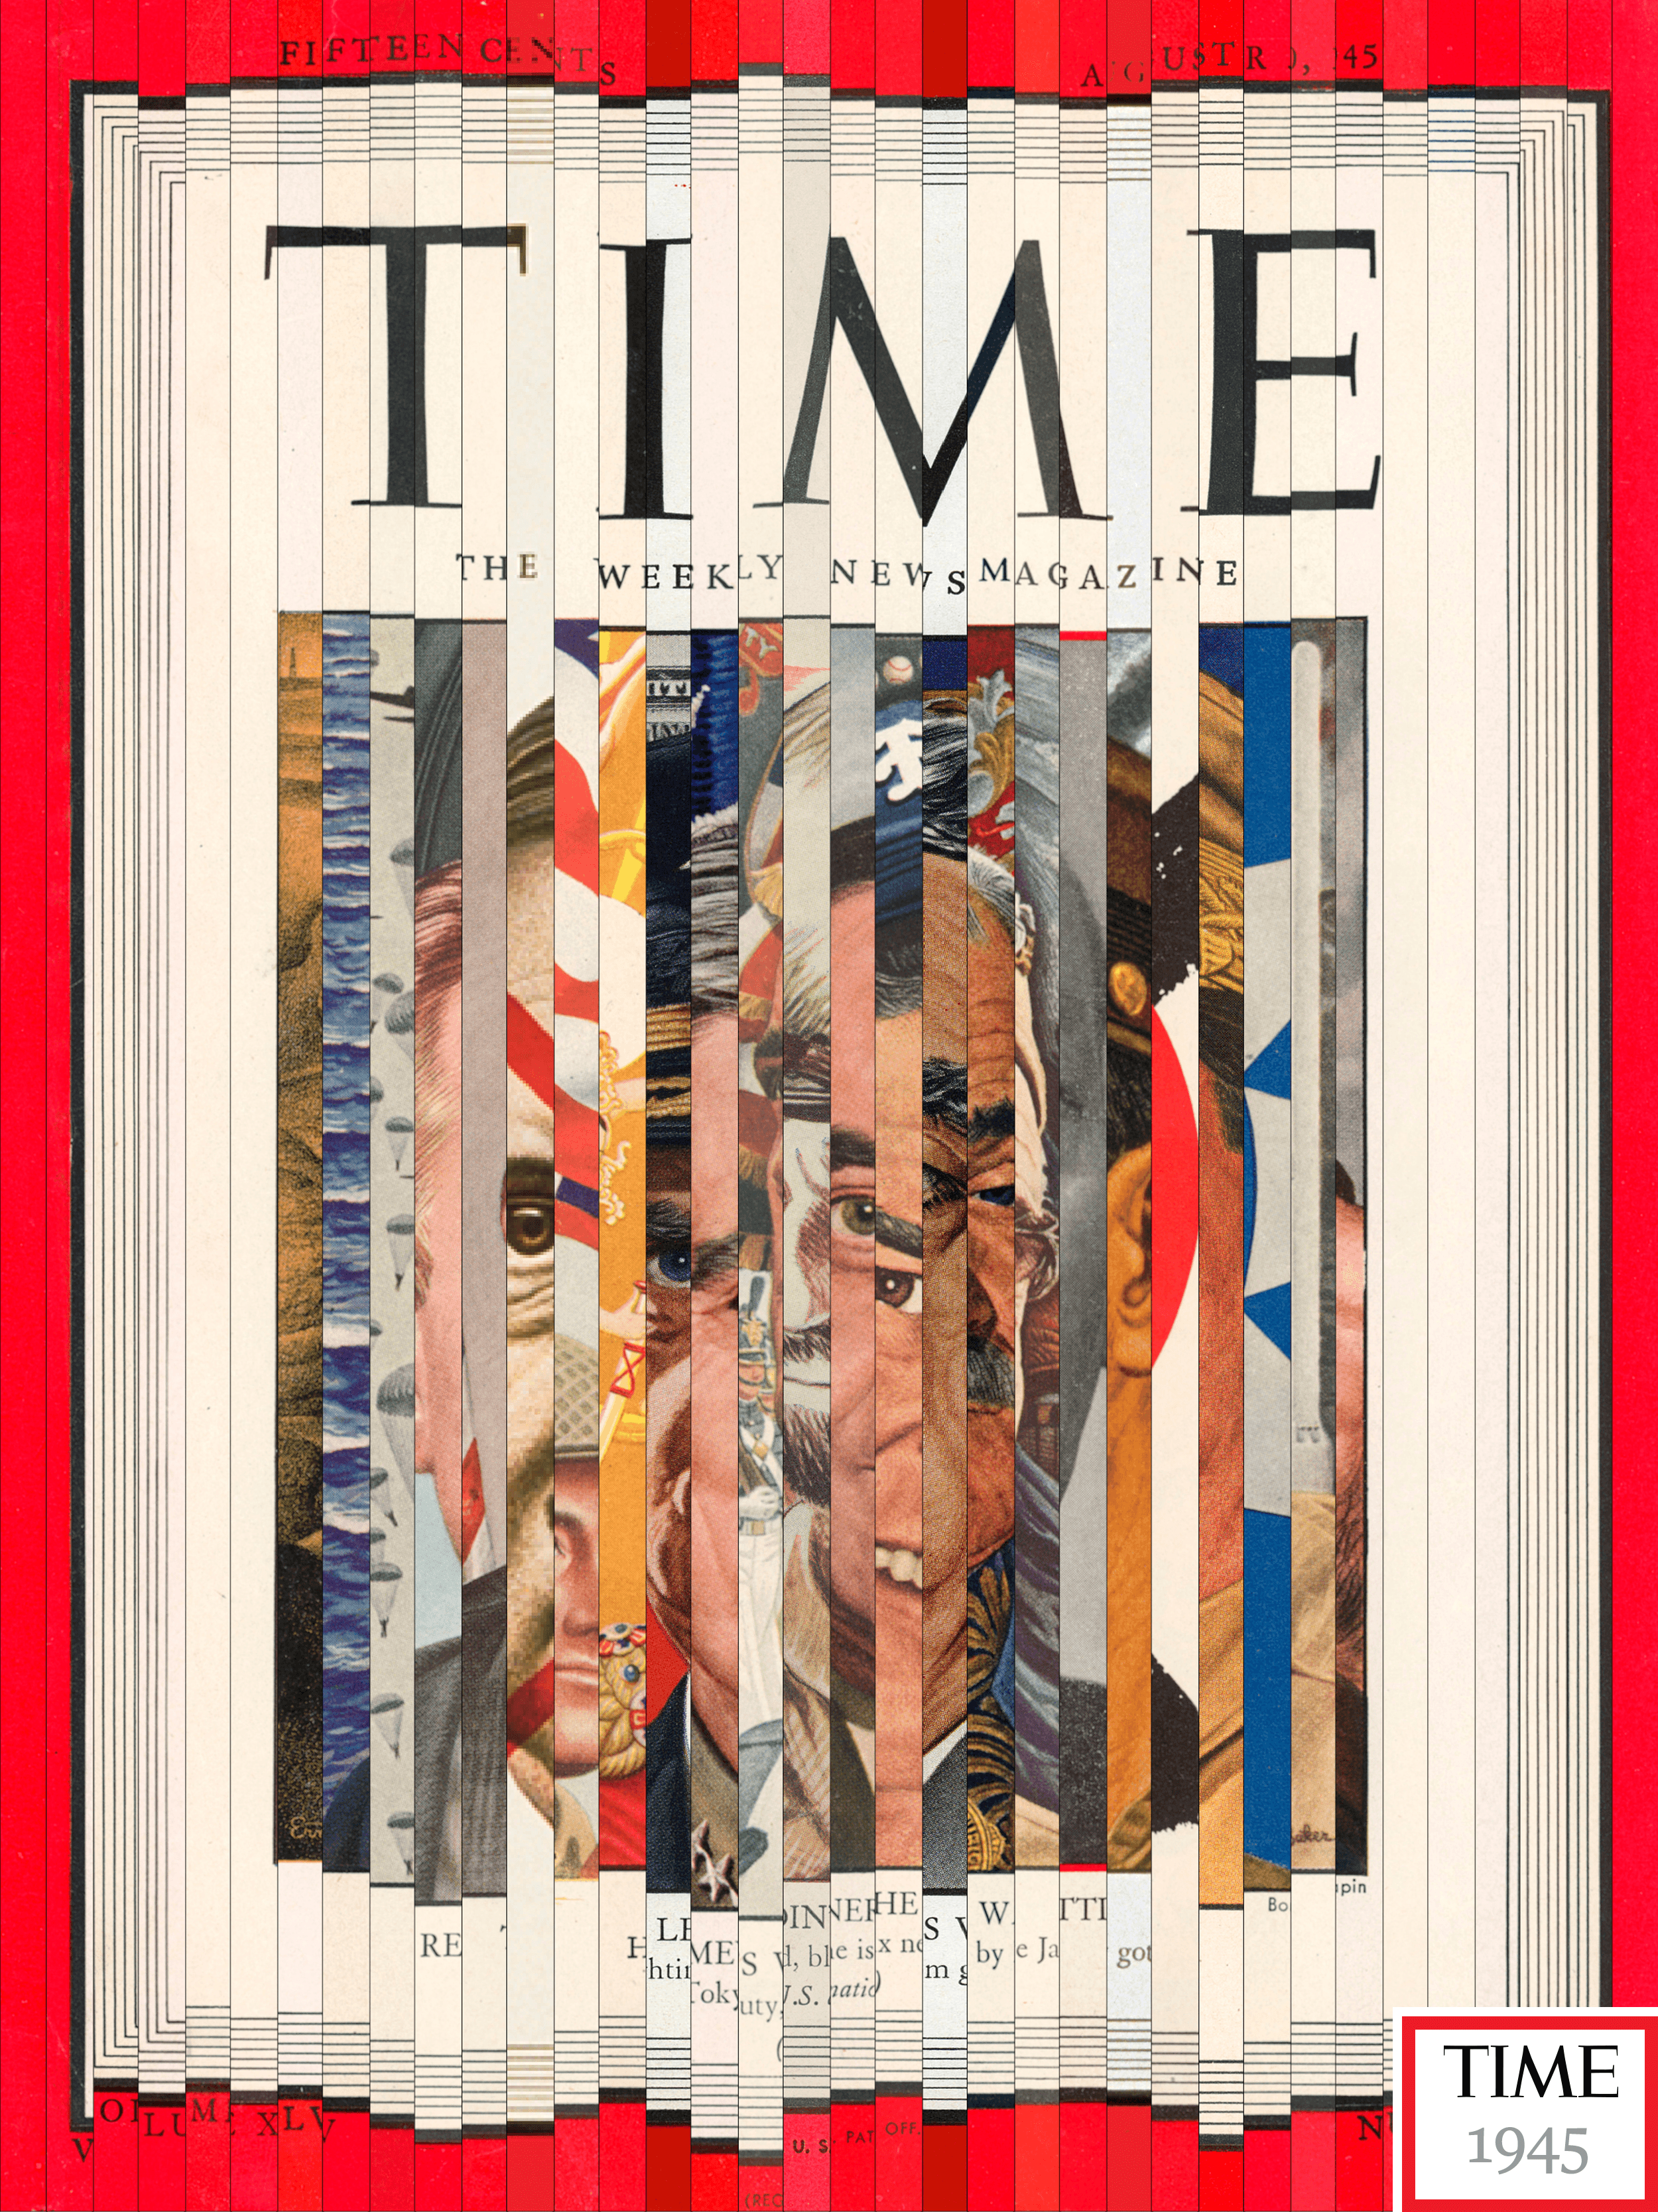 Slice of TIME, 1945 by DW Pine